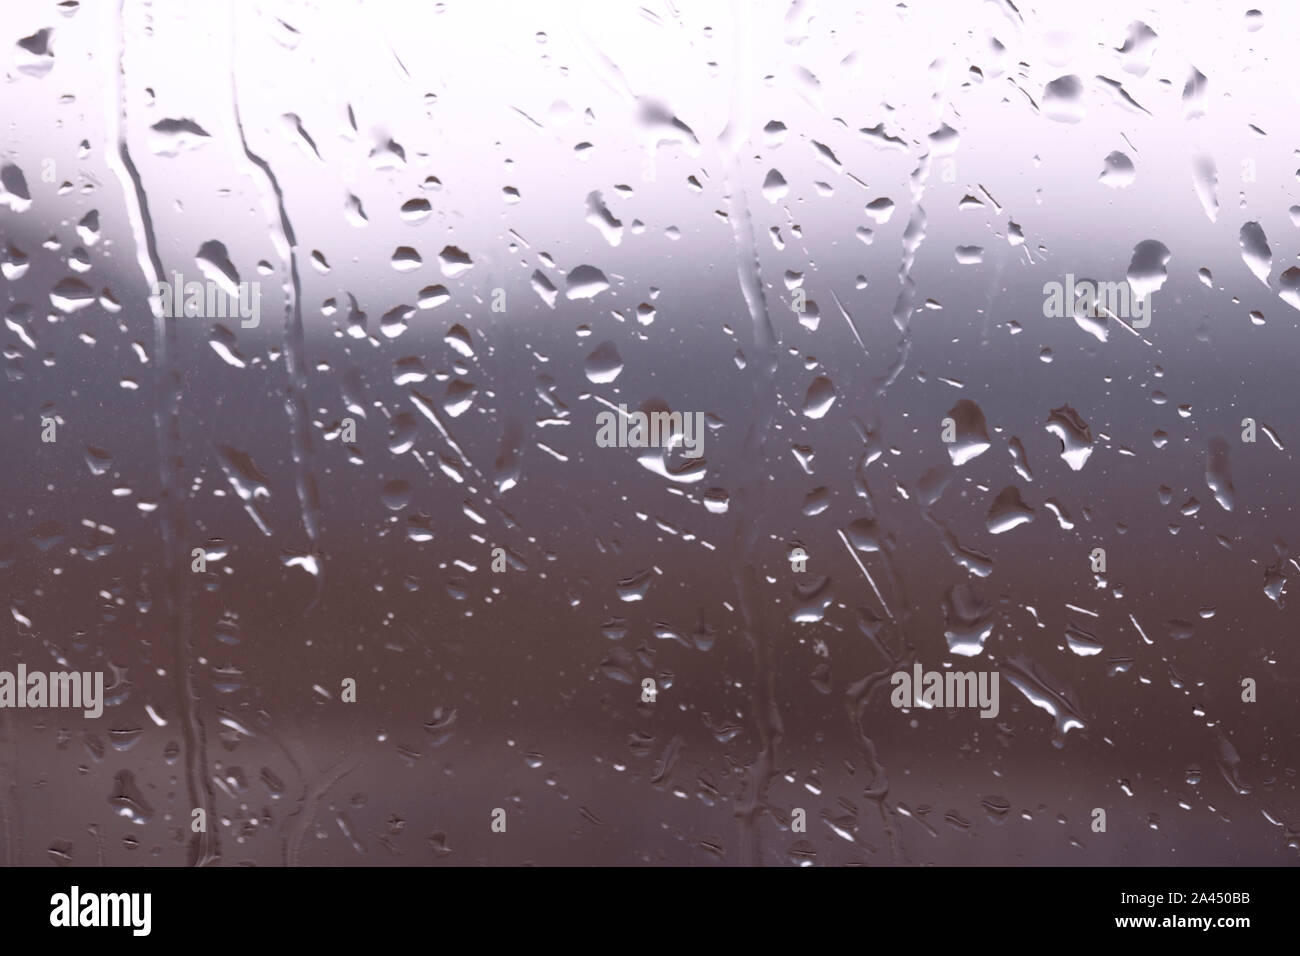 Drops of water on window glass after rain with dramatic blurred sunset on background. Idyllic tranquil nature wallpaper. Weather forecast. Stock Photo